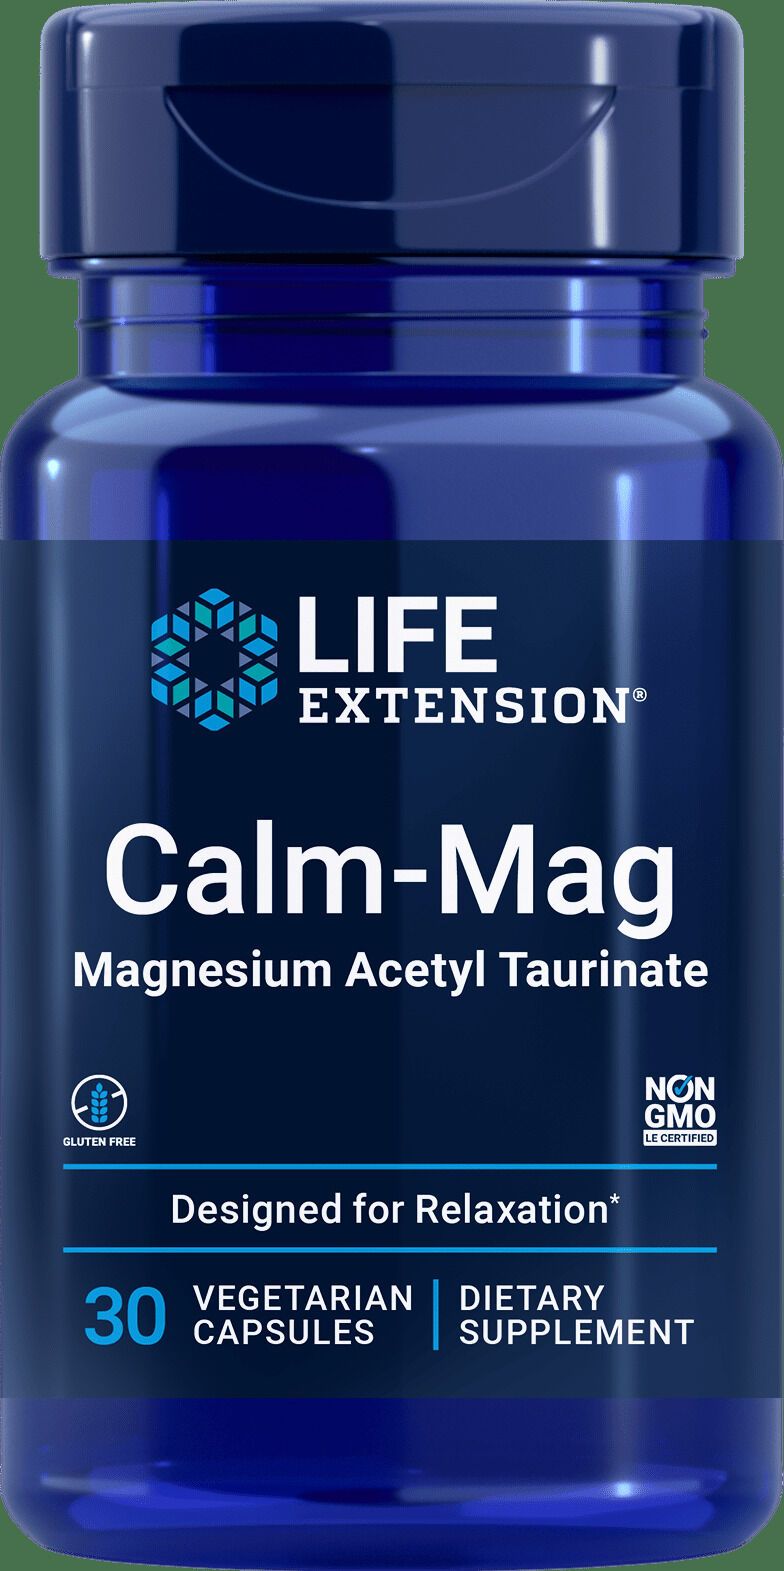 Magnesium-Based Stress Supplements